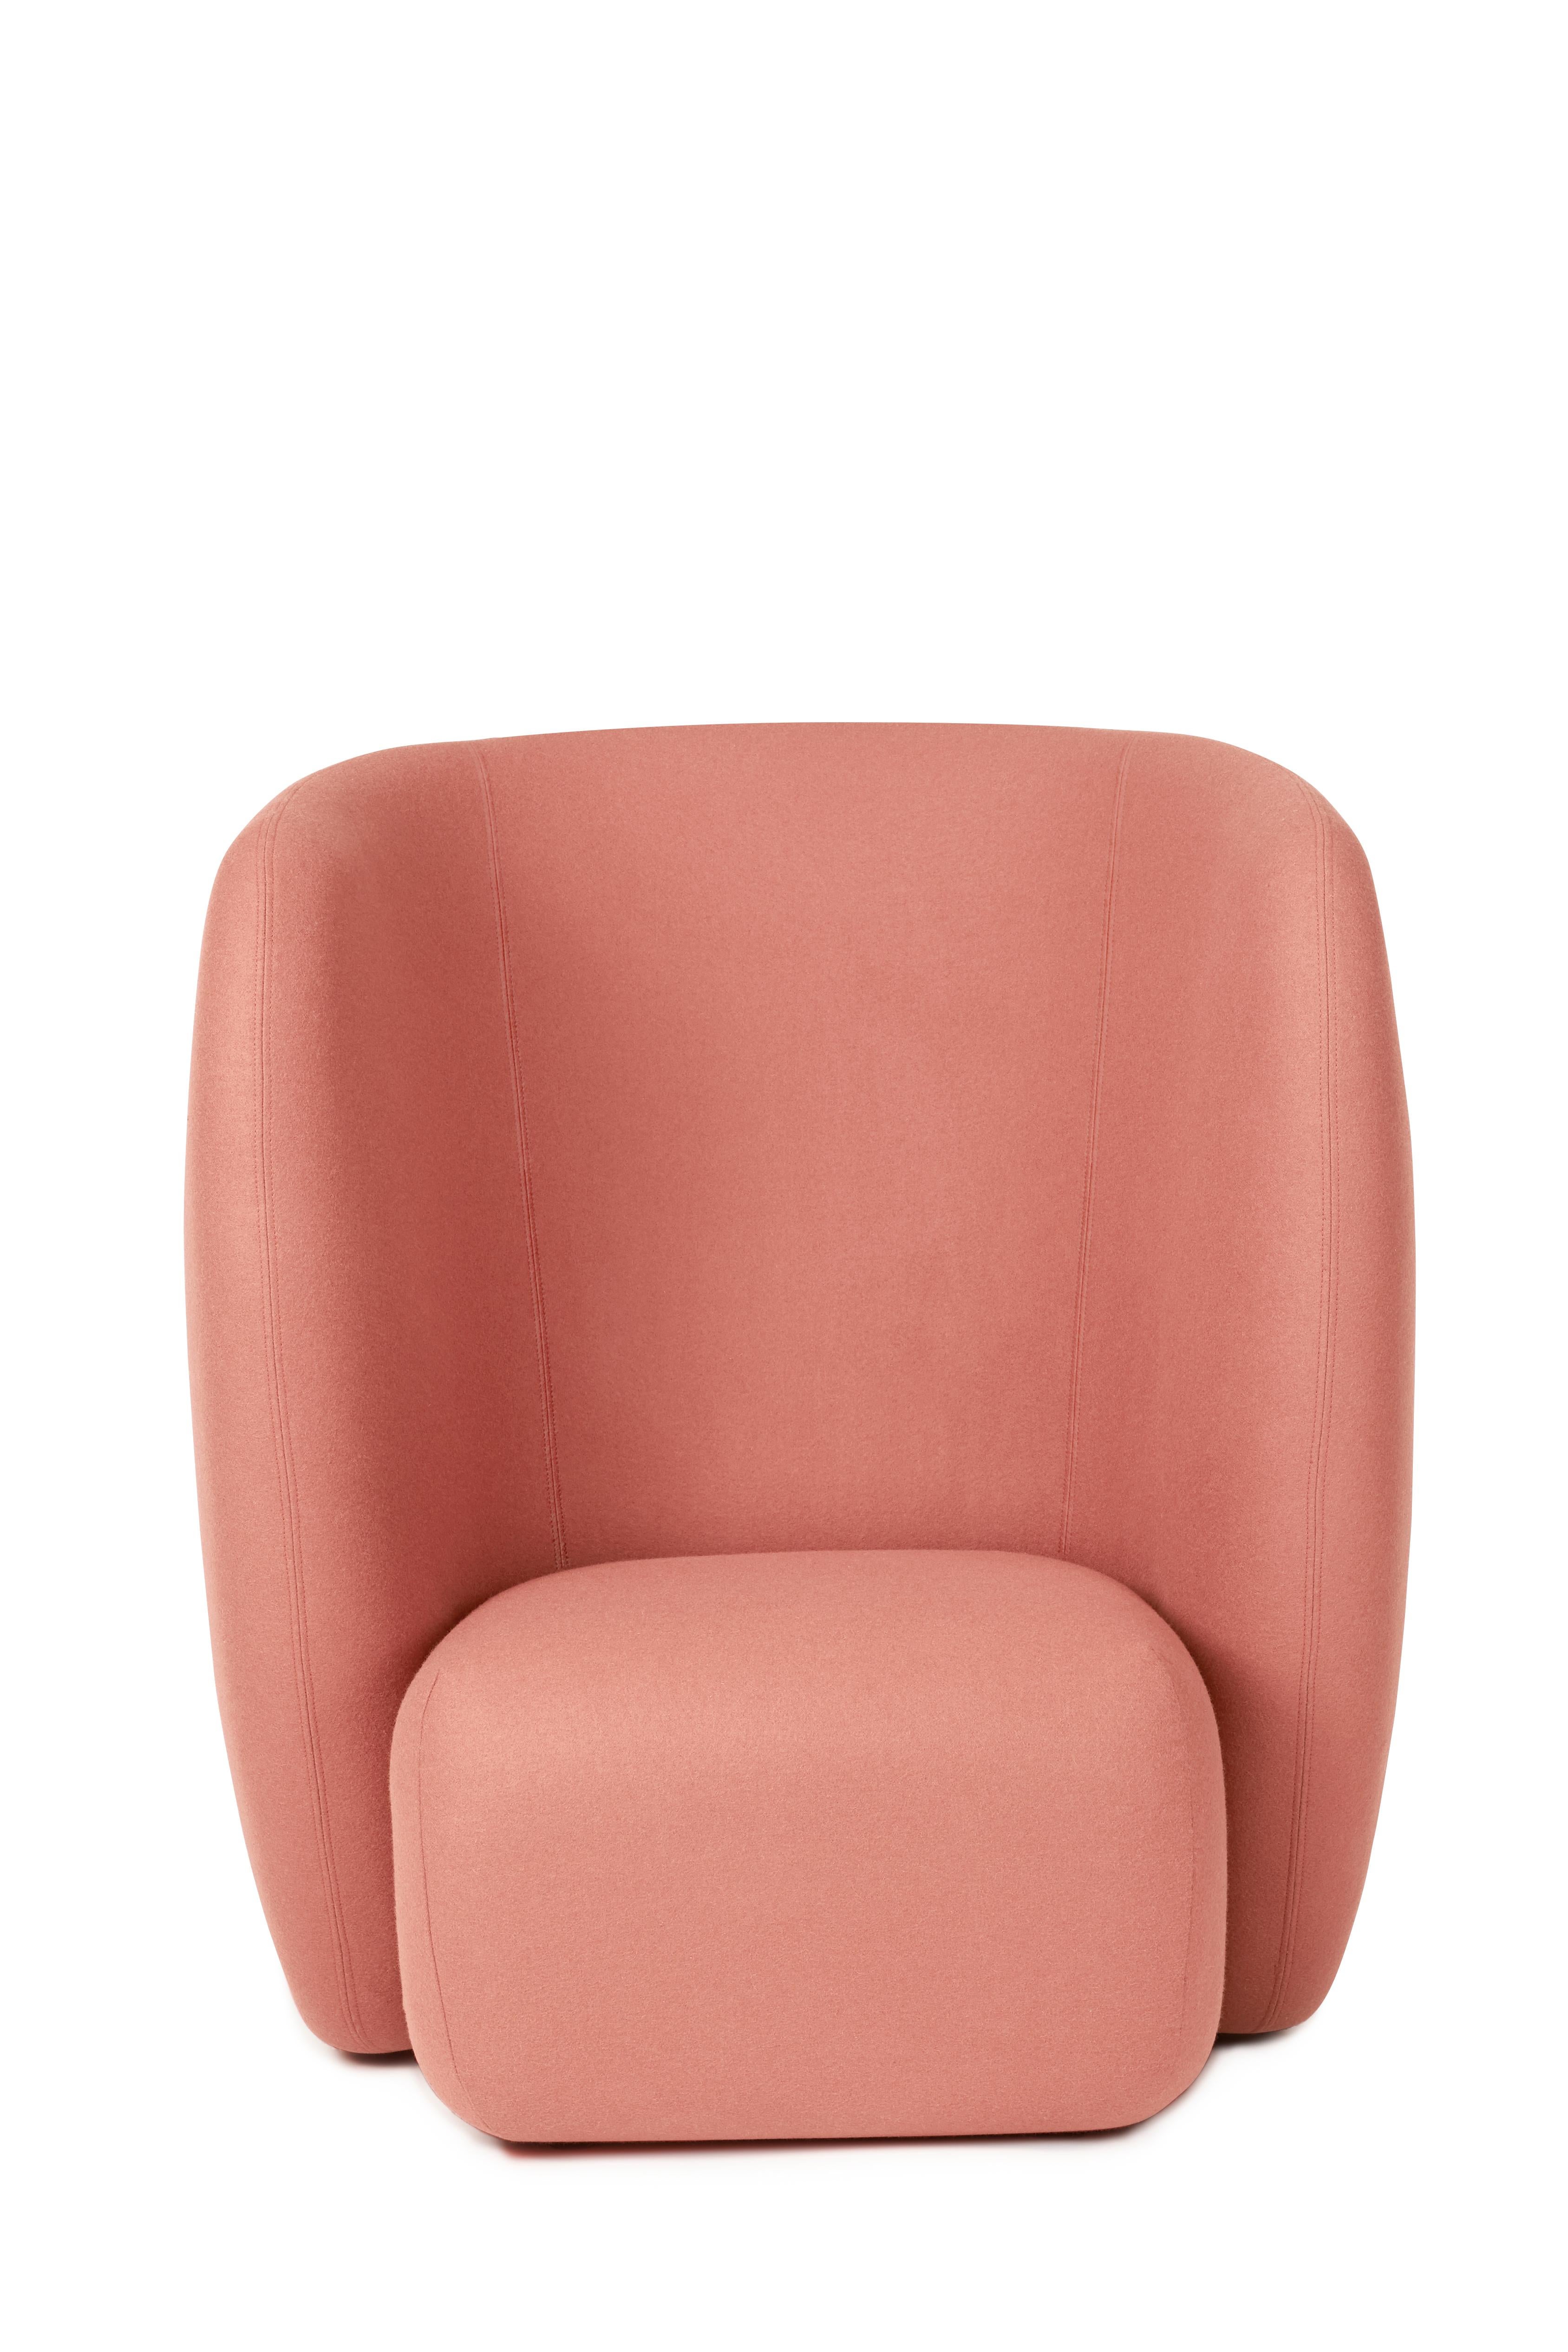 For Sale: Pink (Hero 511) Haven Lounge Chair, by Charlotte Høncke from Warm Nordic